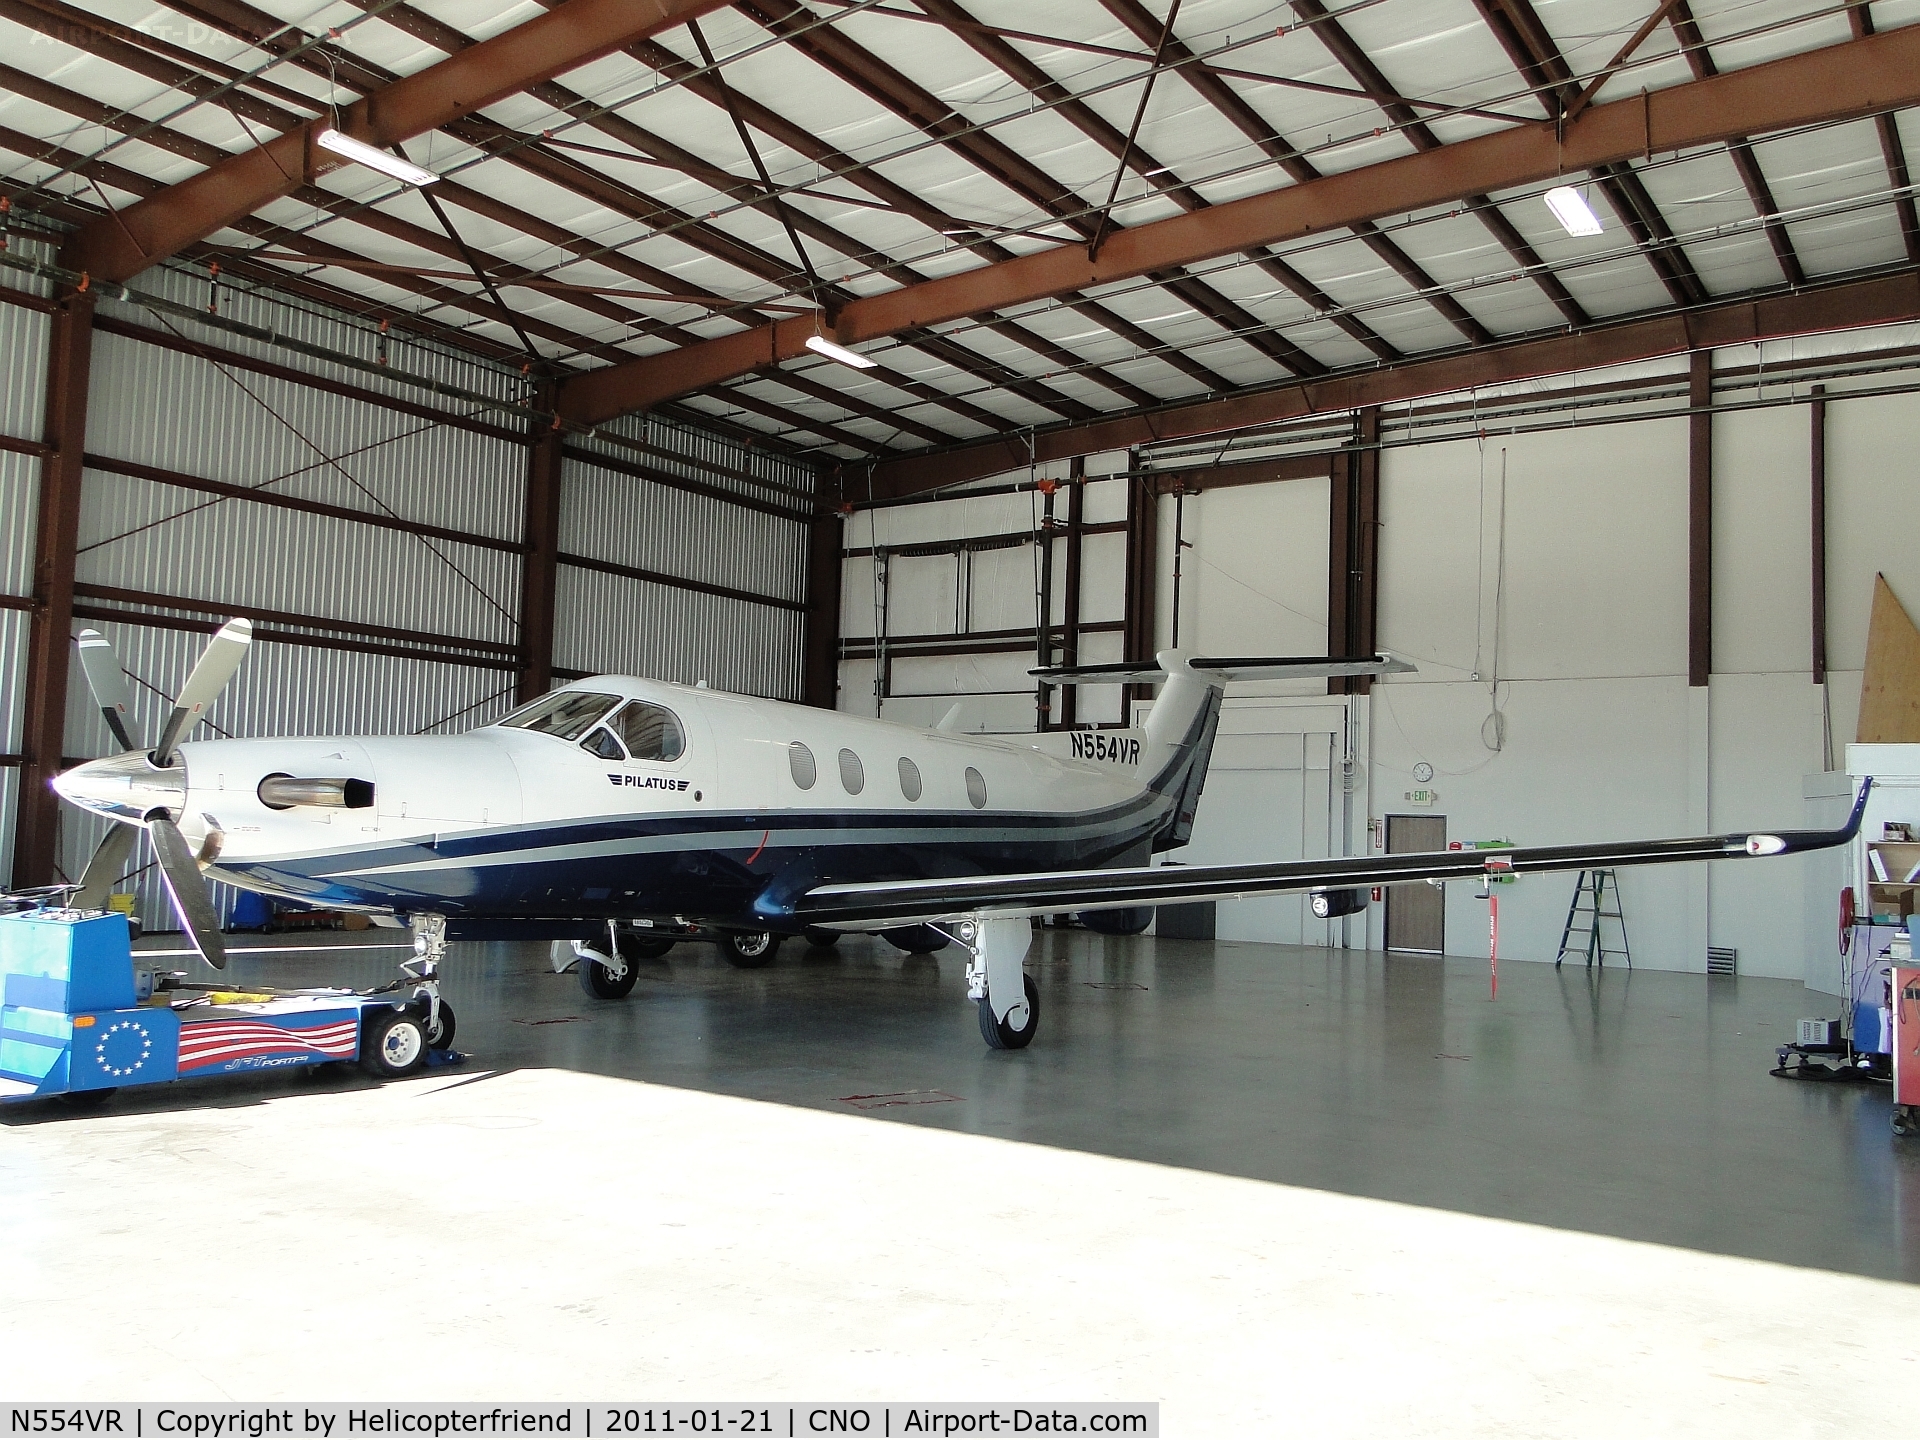 N554VR, 1999 Pilatus PC-12/45 C/N 288, Has tug hooked up, unknown if coming out or going in